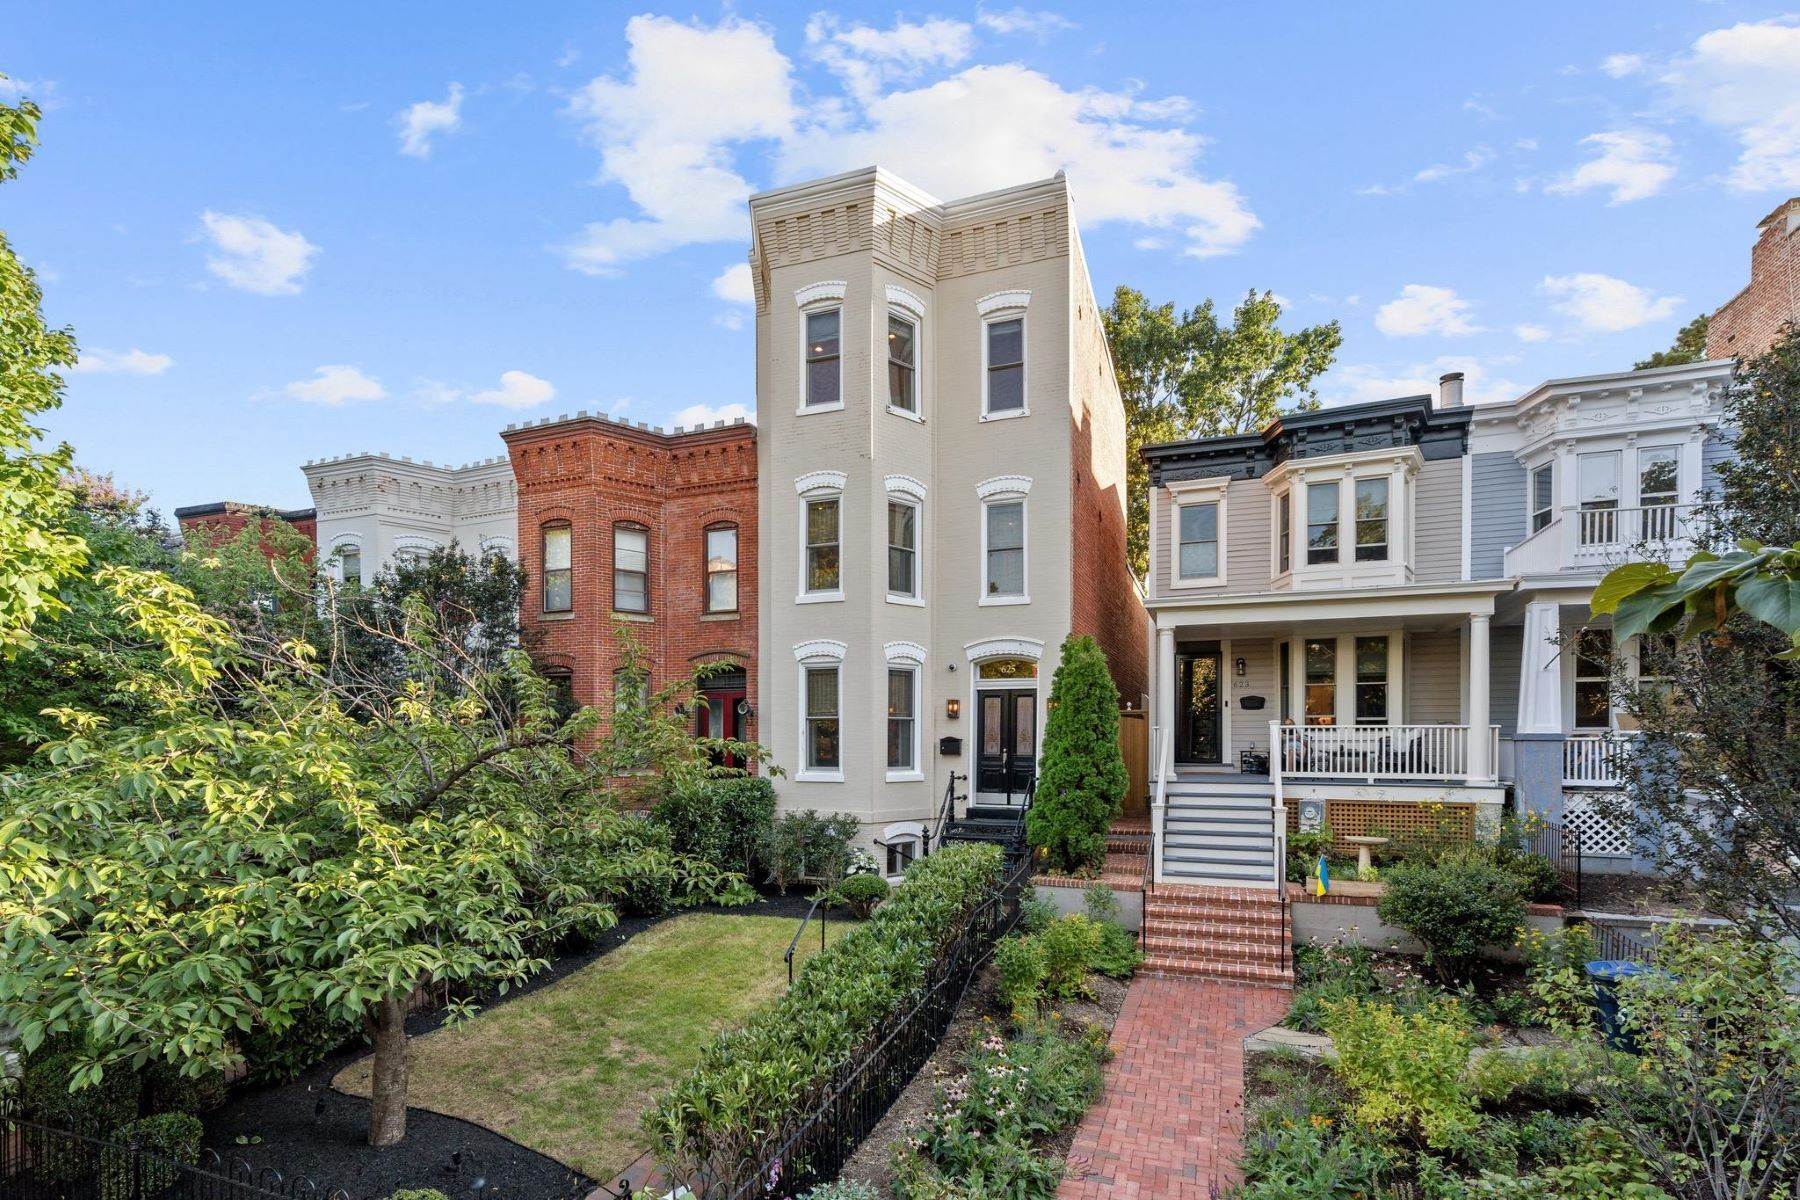 Other Residential Homes for Sale at 625 Massachusetts Ave Ne Washington, District Of Columbia 20002 United States